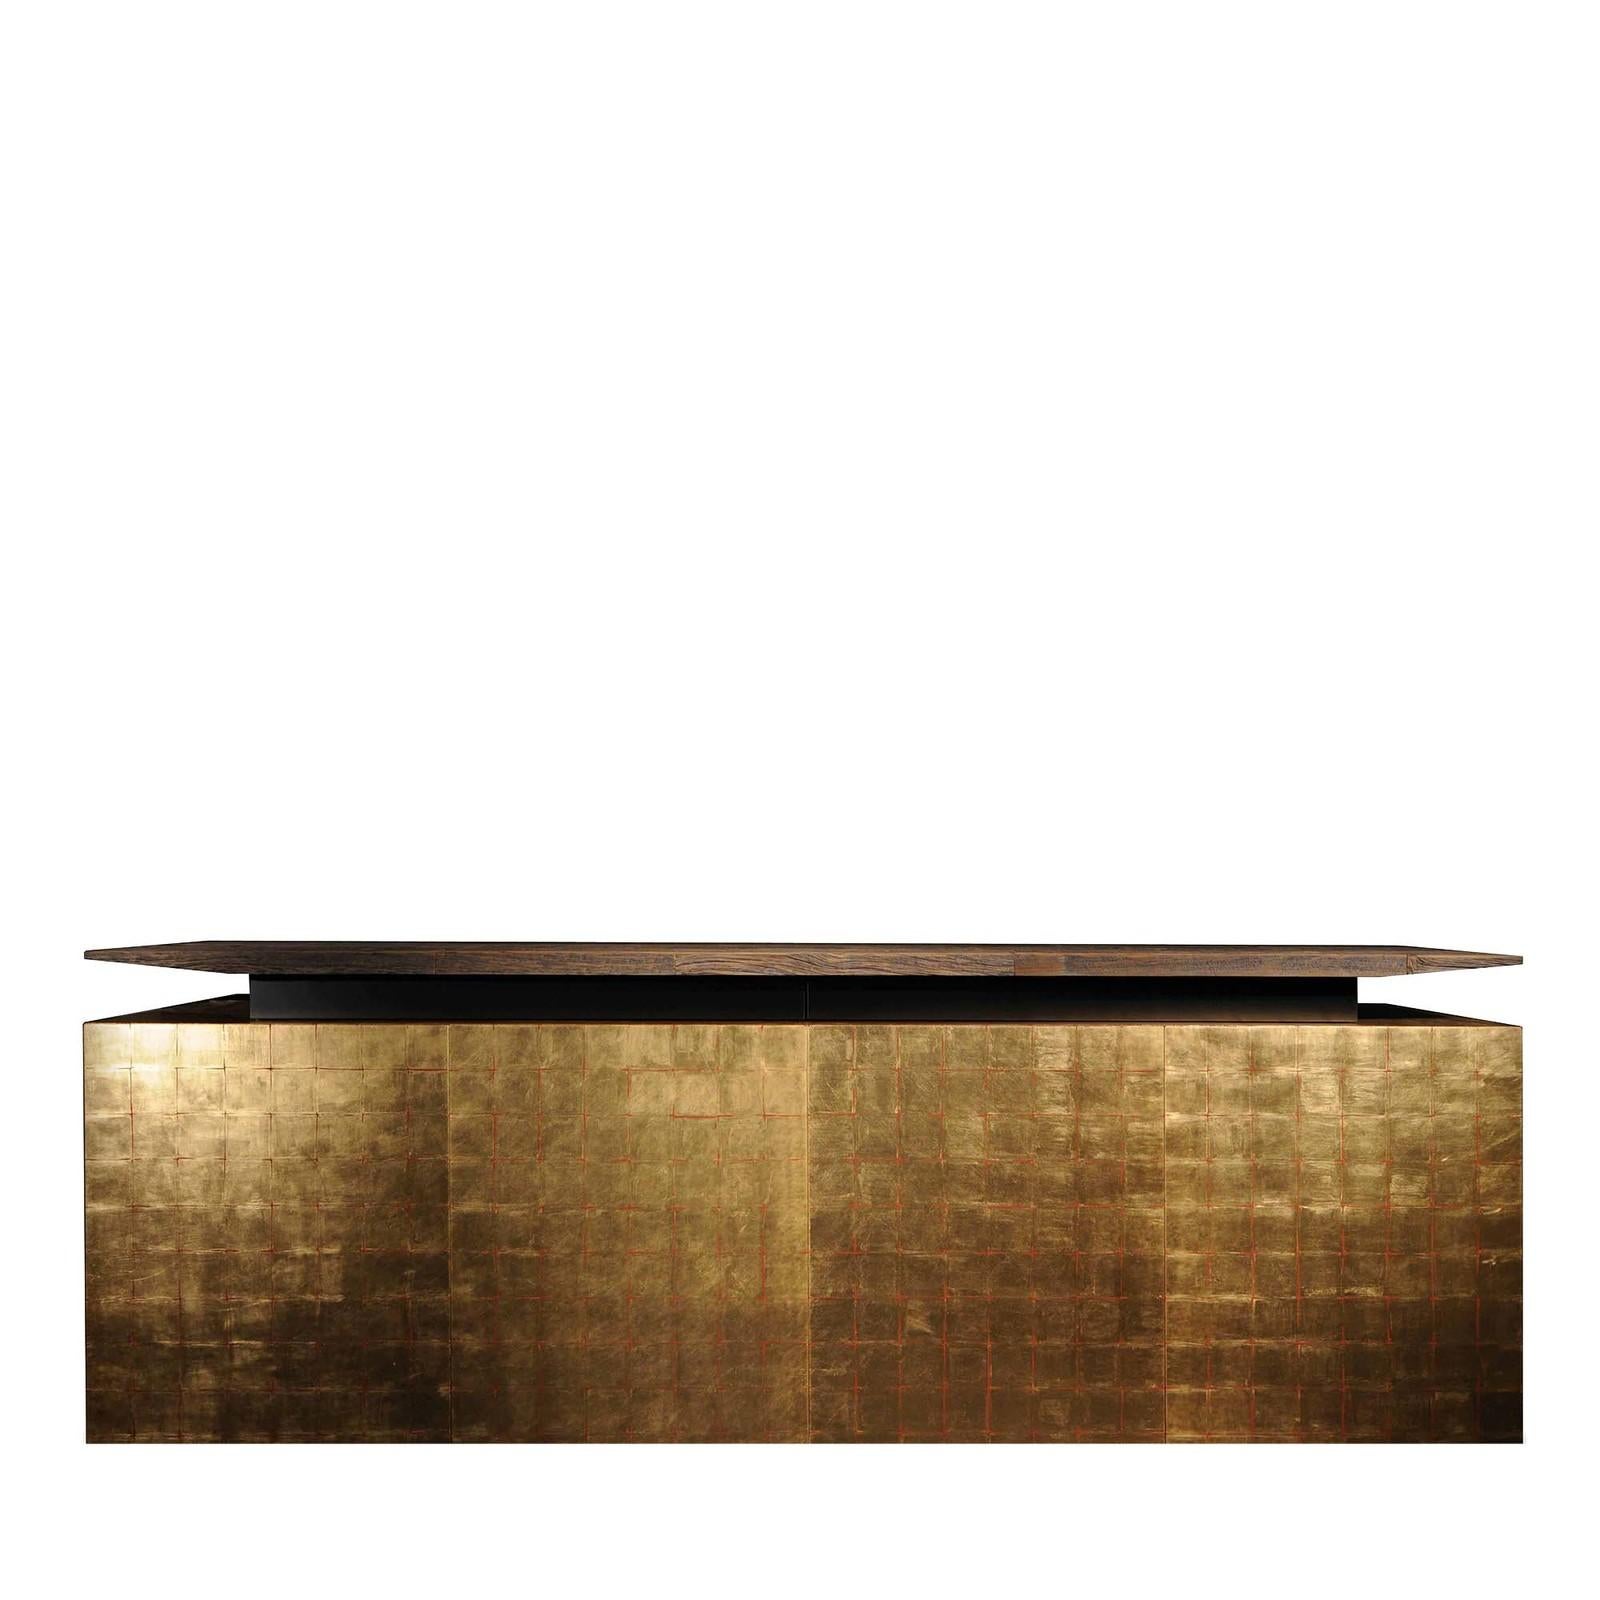 Simple, pure, glamorous: this stunning cabinet defies fleeting trends with its timeless elegance and unique characteristics. The linear silhouette includes a lower section with four soft-close doors finished in gold leaf (also available in silver